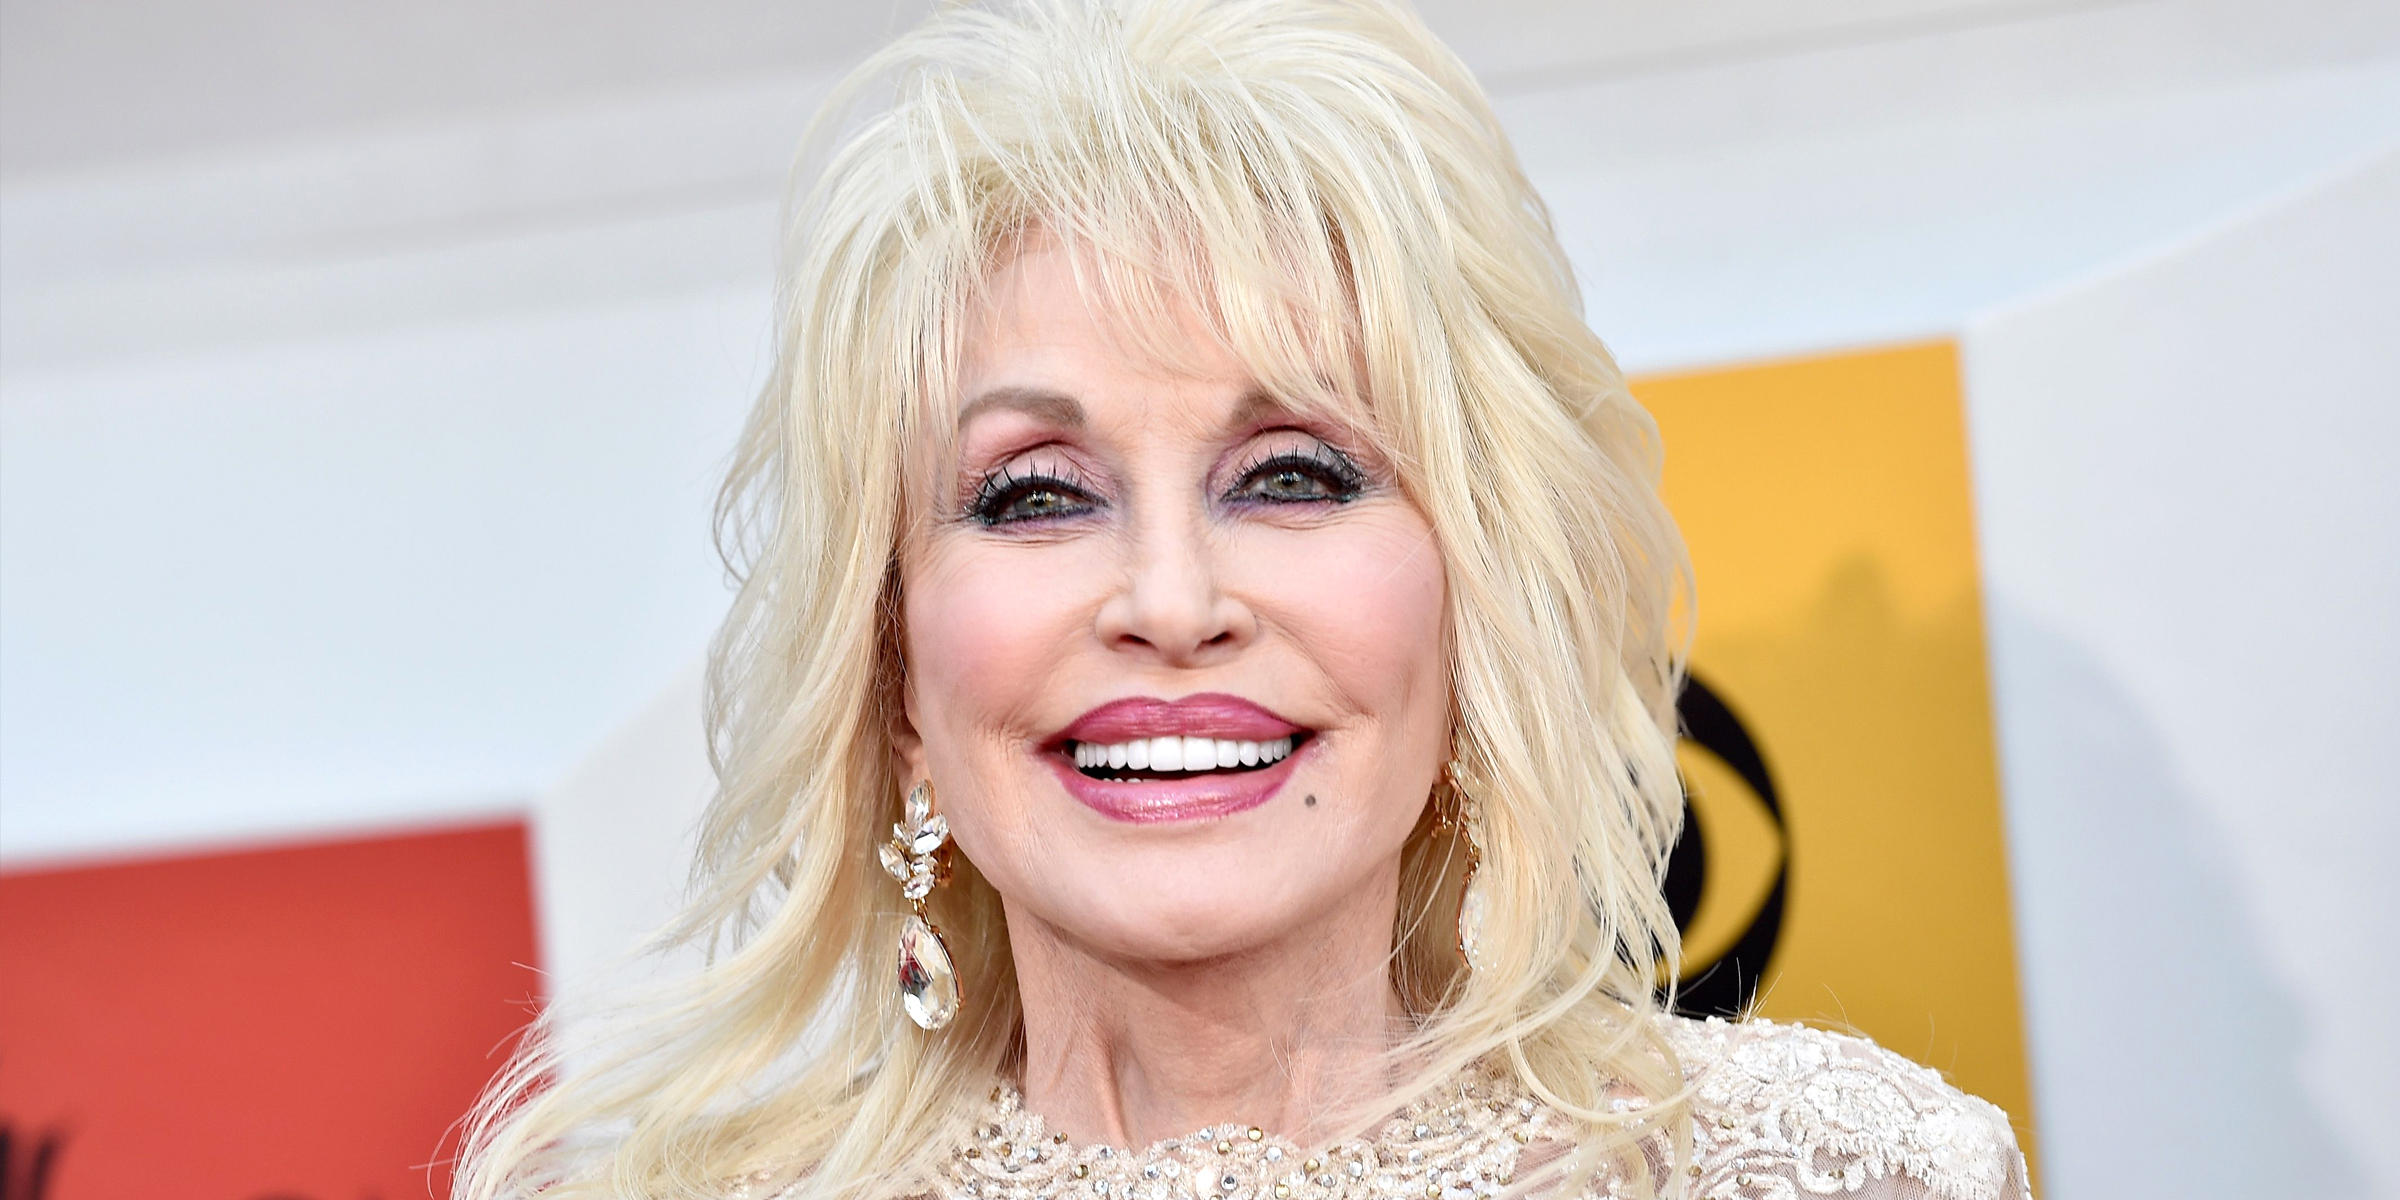 Dolly Parton┃Source: Getty Images